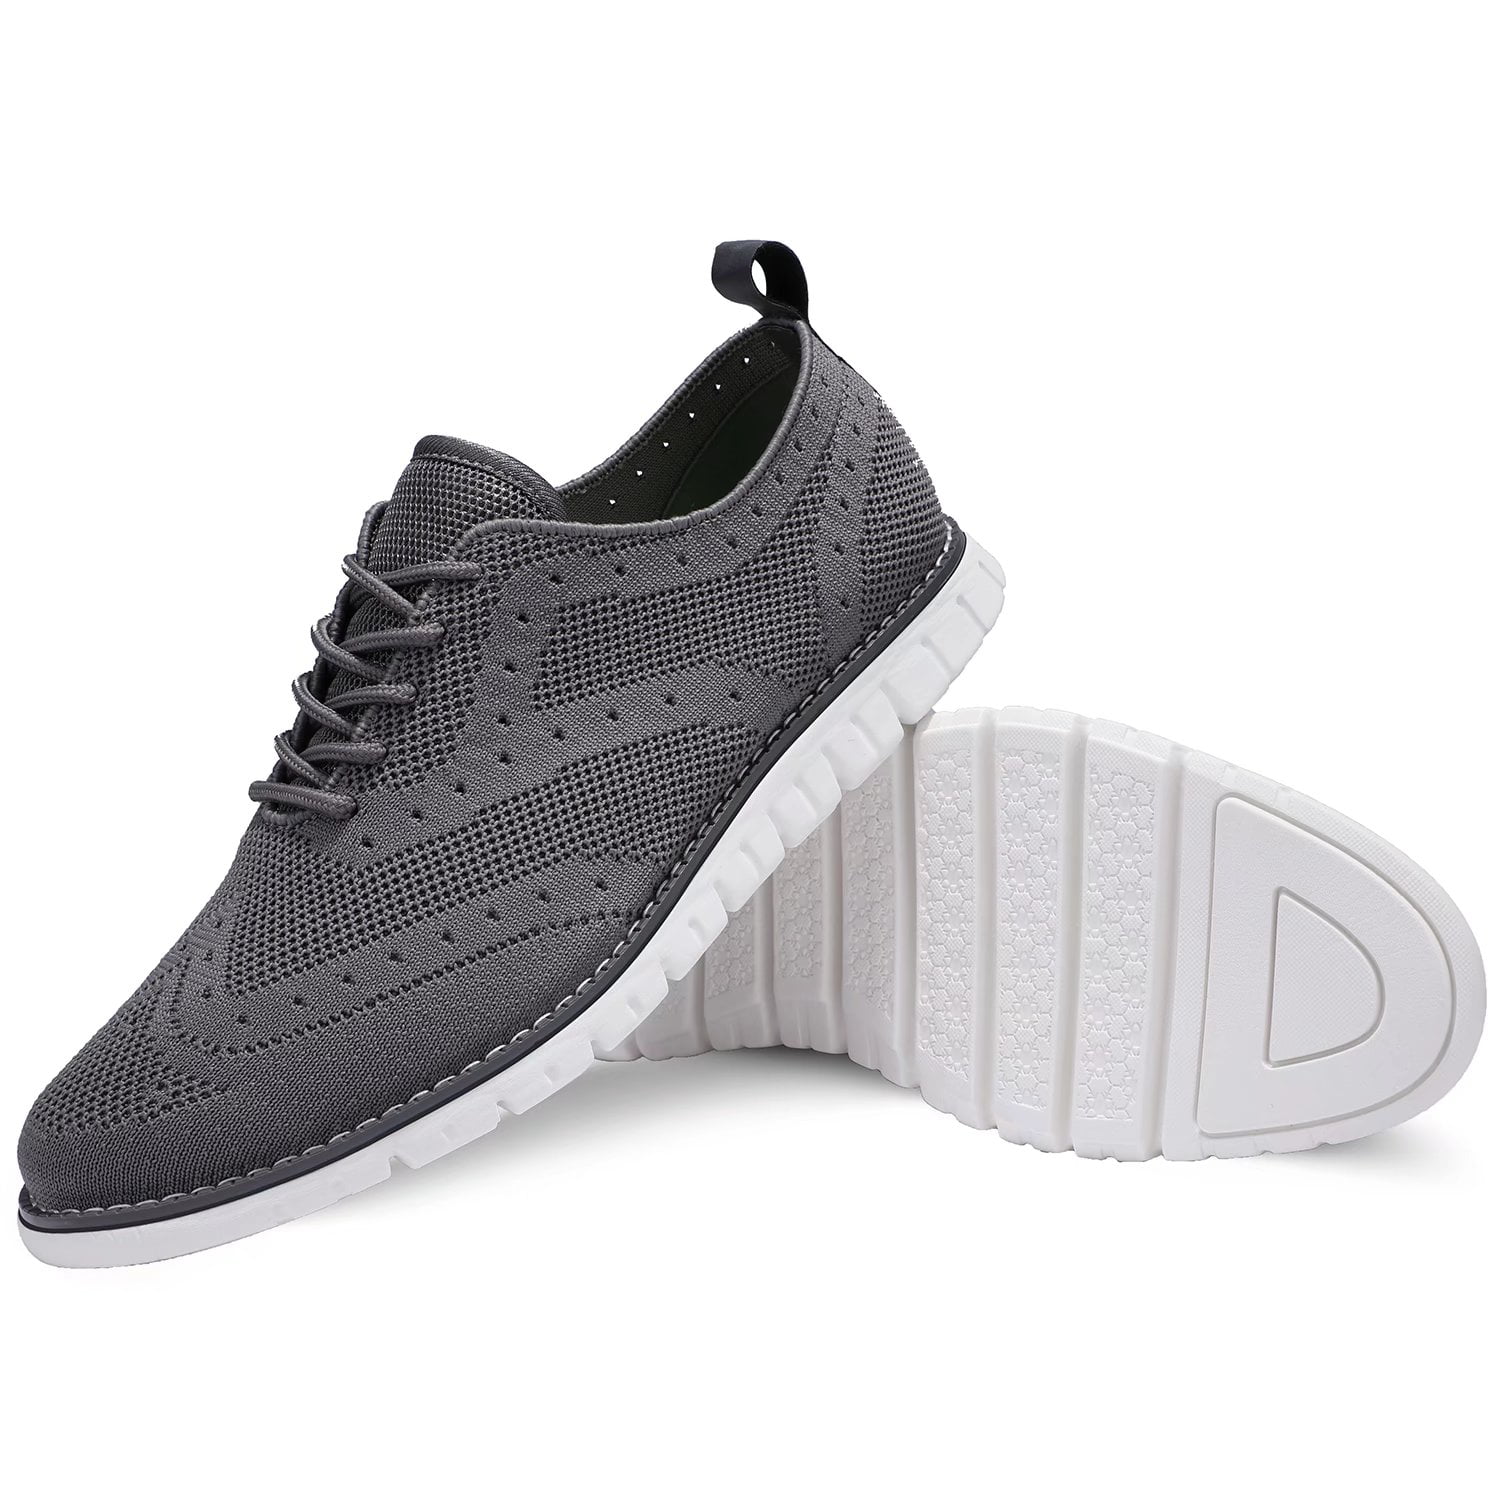 Mens Oxfords Shoes Mesh Breathable Casual Wingtip Dress Shoes 